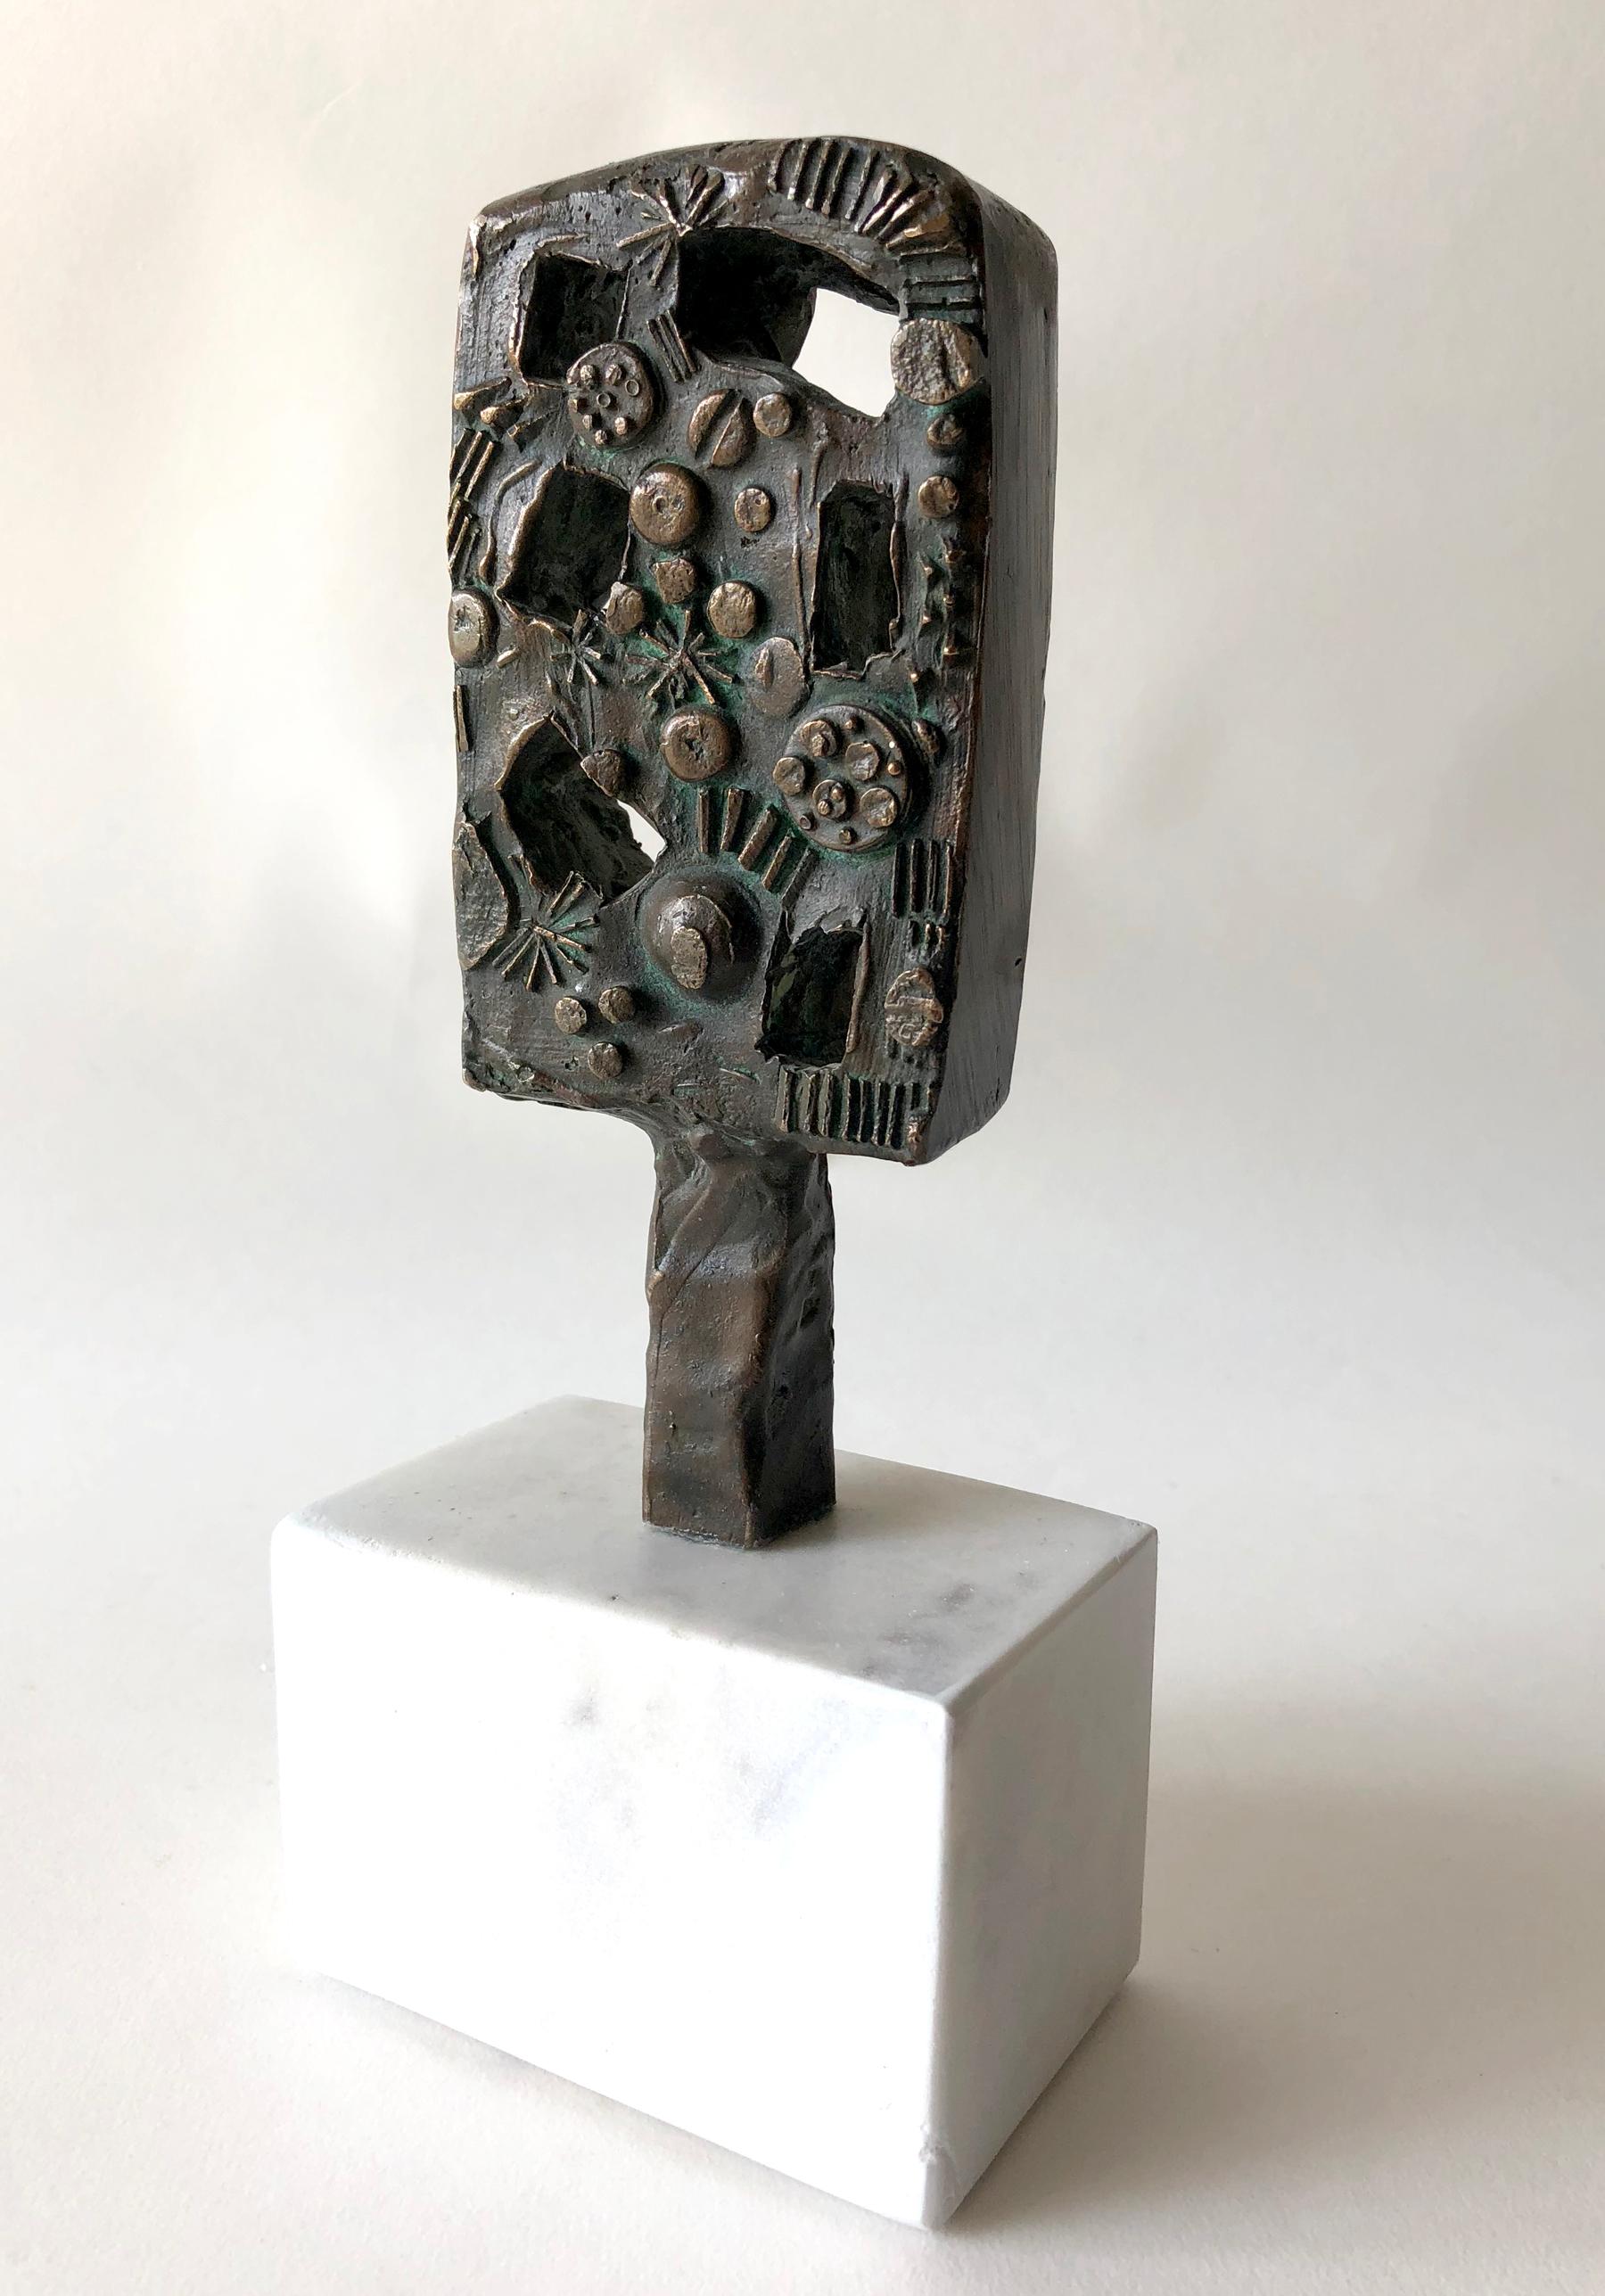 Abstract, American modernist bronze sculpture on white marble base, circa 1950s. Sculpture stands 8.75